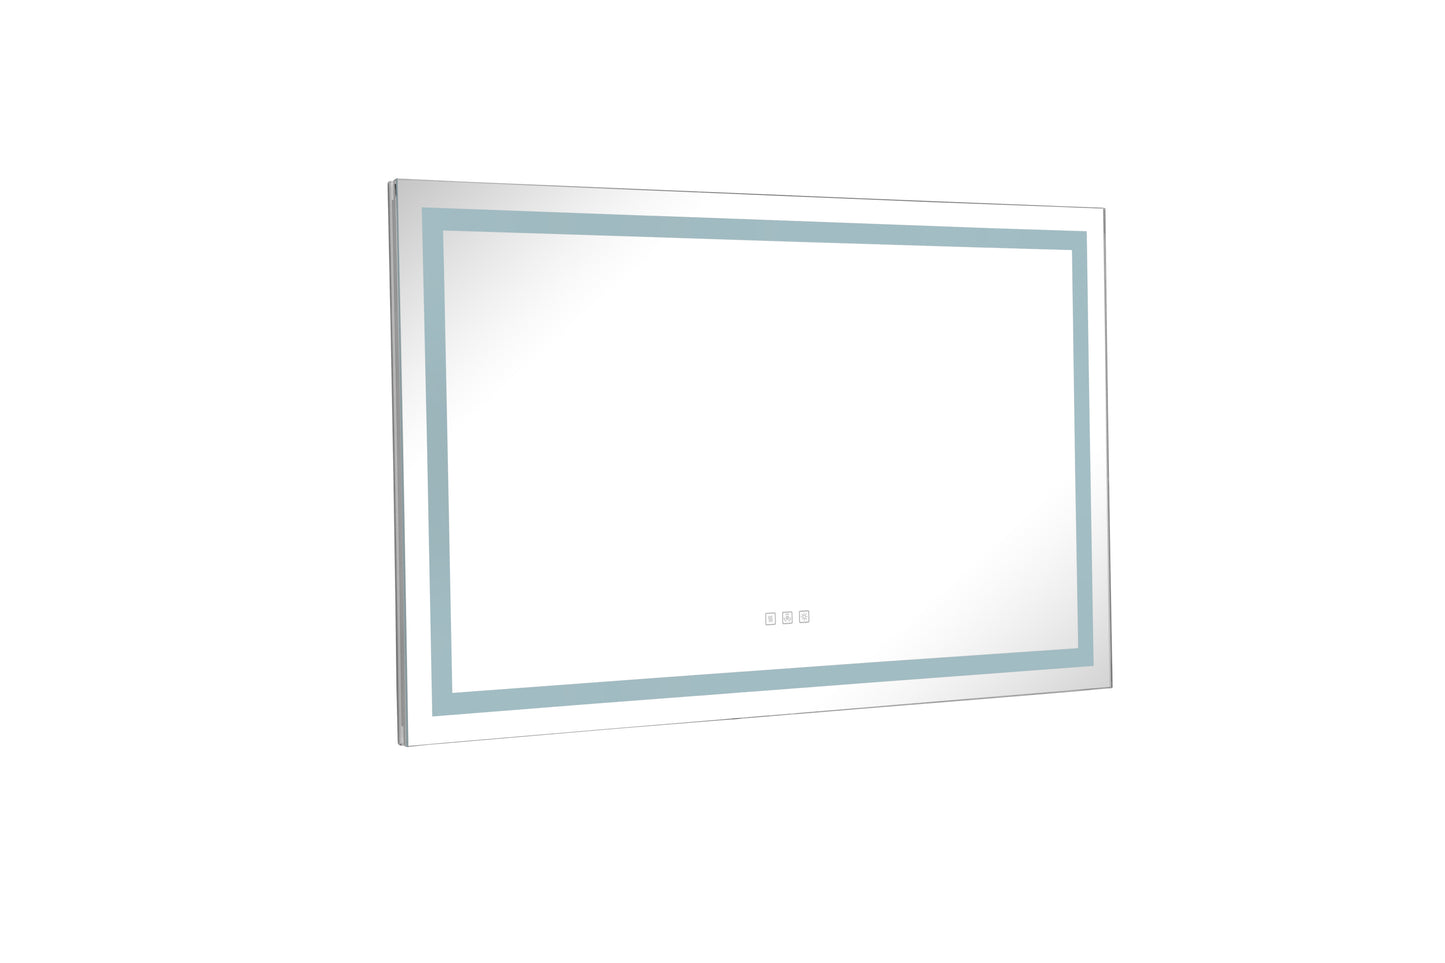 48 x 36 Inch LED Mirror Bathroom Vanity Mirrors with Lights, Wall Mounted Anti-Fog Memory Large Dimmable Front Light Makeup Mirror